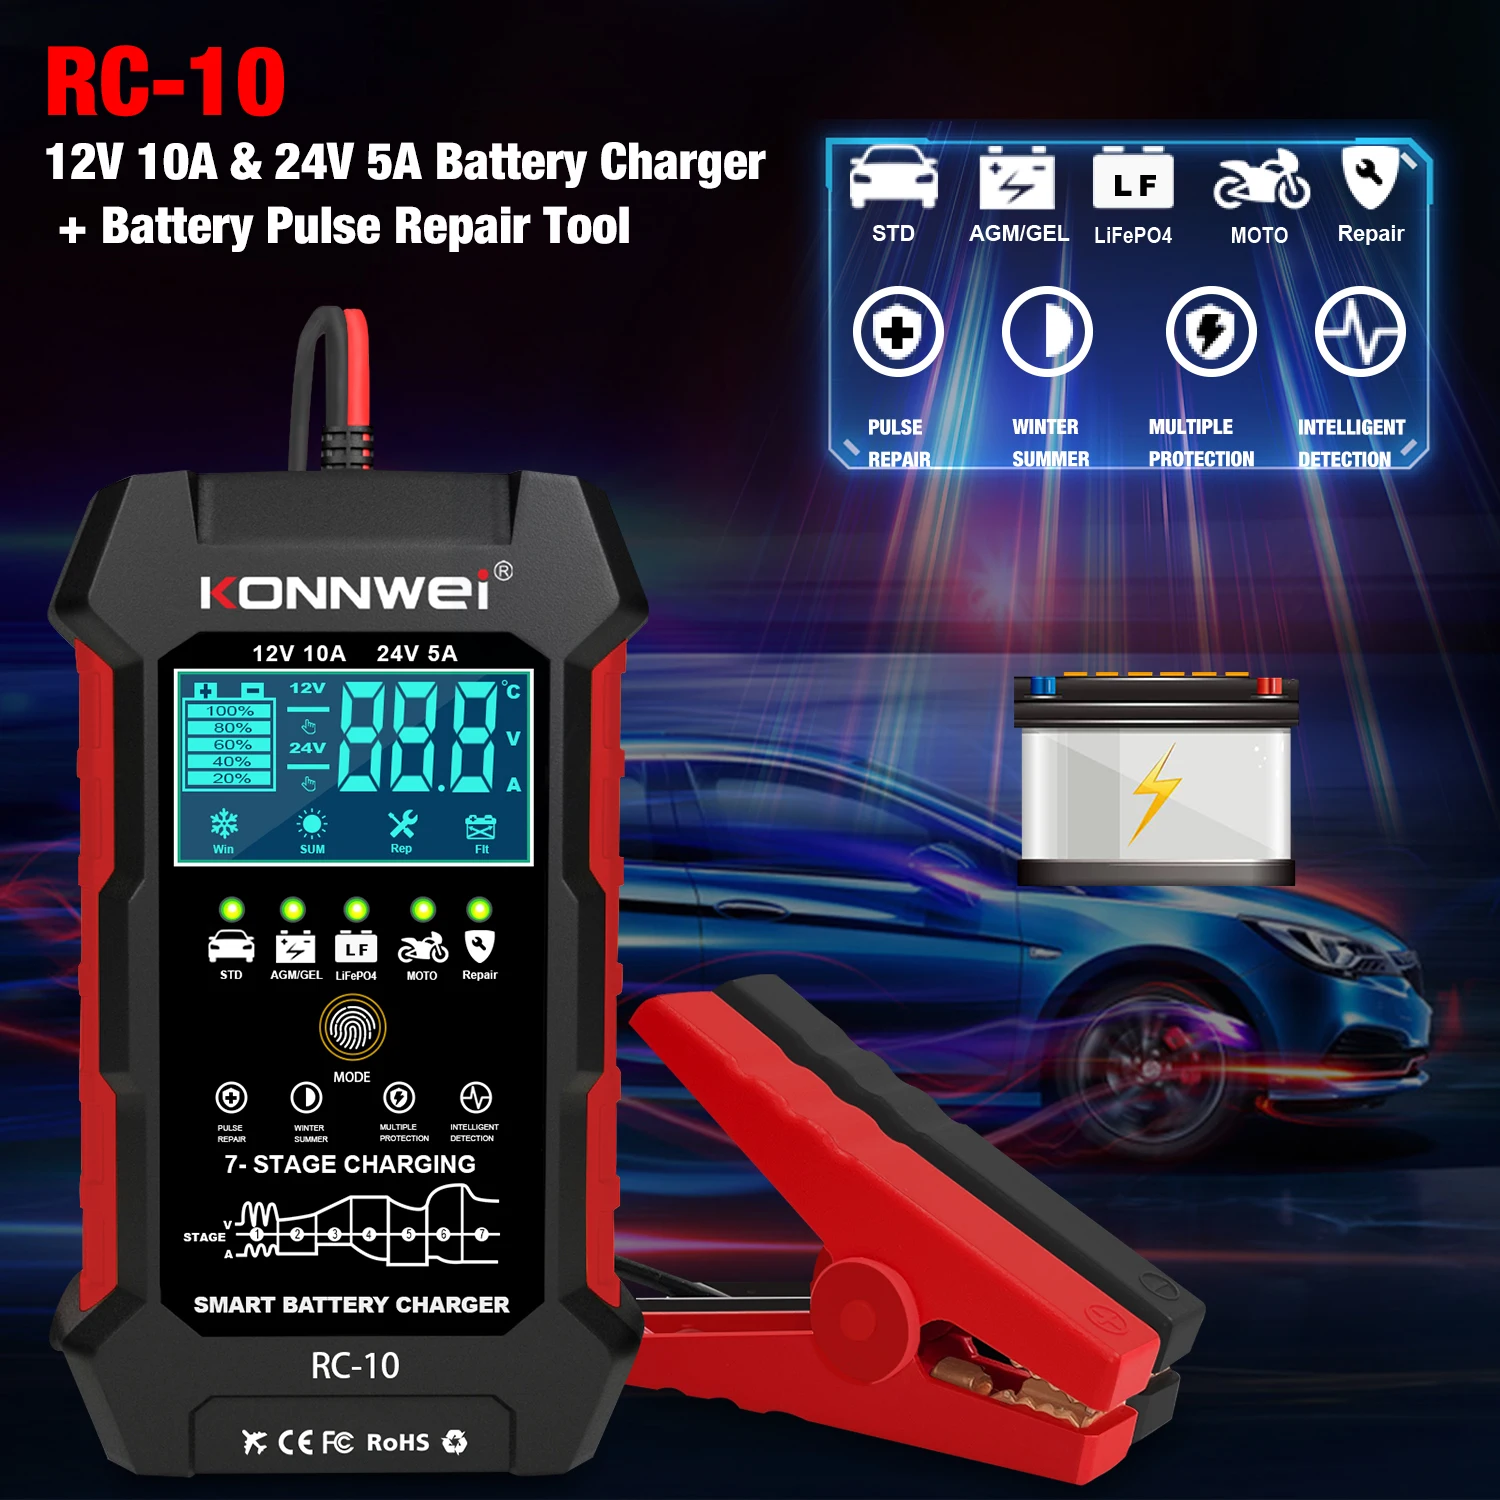 

KONNWEI RC-10 Car Battery Charger Pulse Repairl tool for 12 V 5A 24 V 10A Lead acid battery lithium with UK US UL EU Plugs